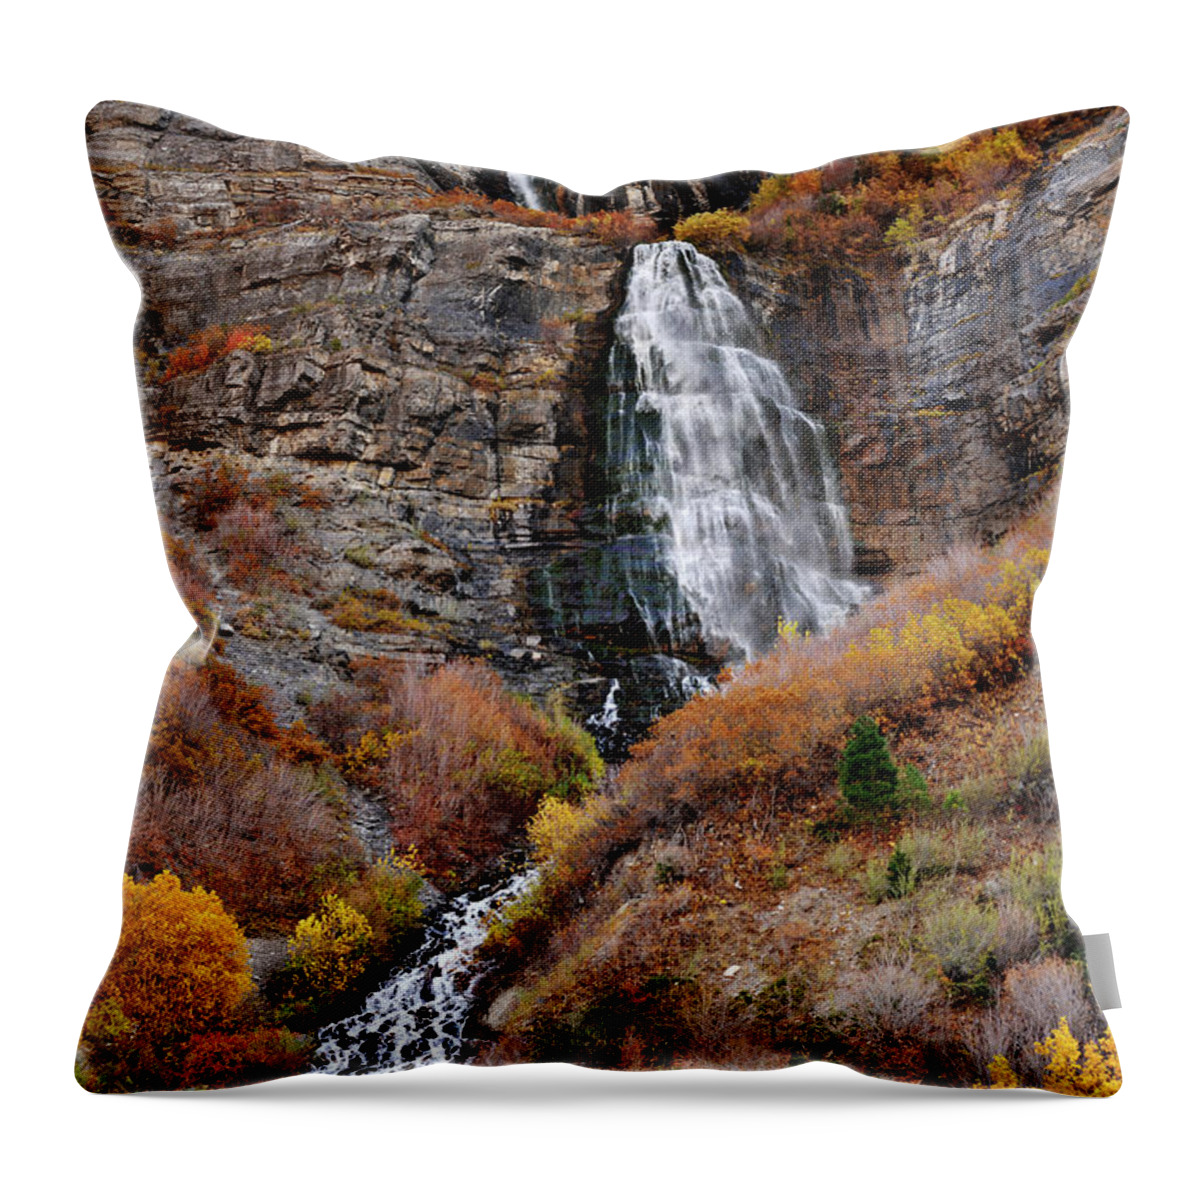 Scenics Throw Pillow featuring the photograph Bridal Veil Falls In Provo Canyon by Utah-based Photographer Ryan Houston